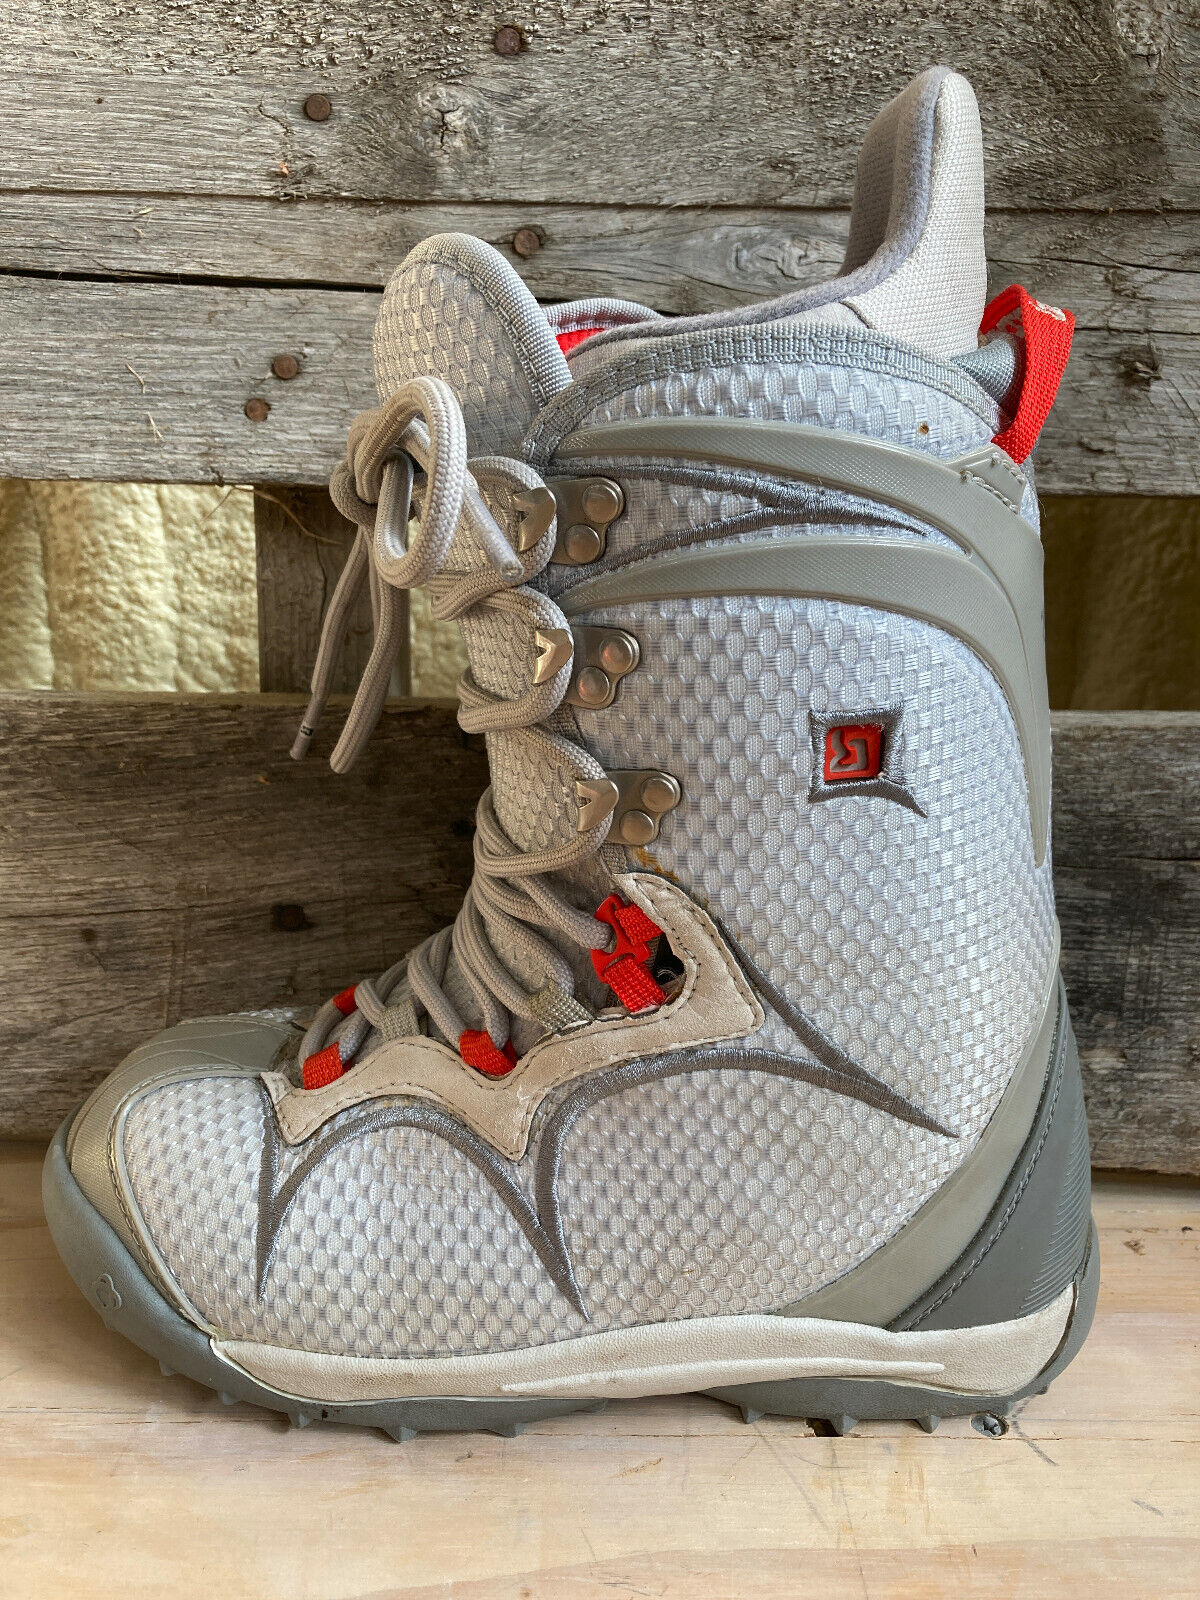 Burton Sapphire Snowboard Boots - Womens 7 - Grey/red - Excellent Condition